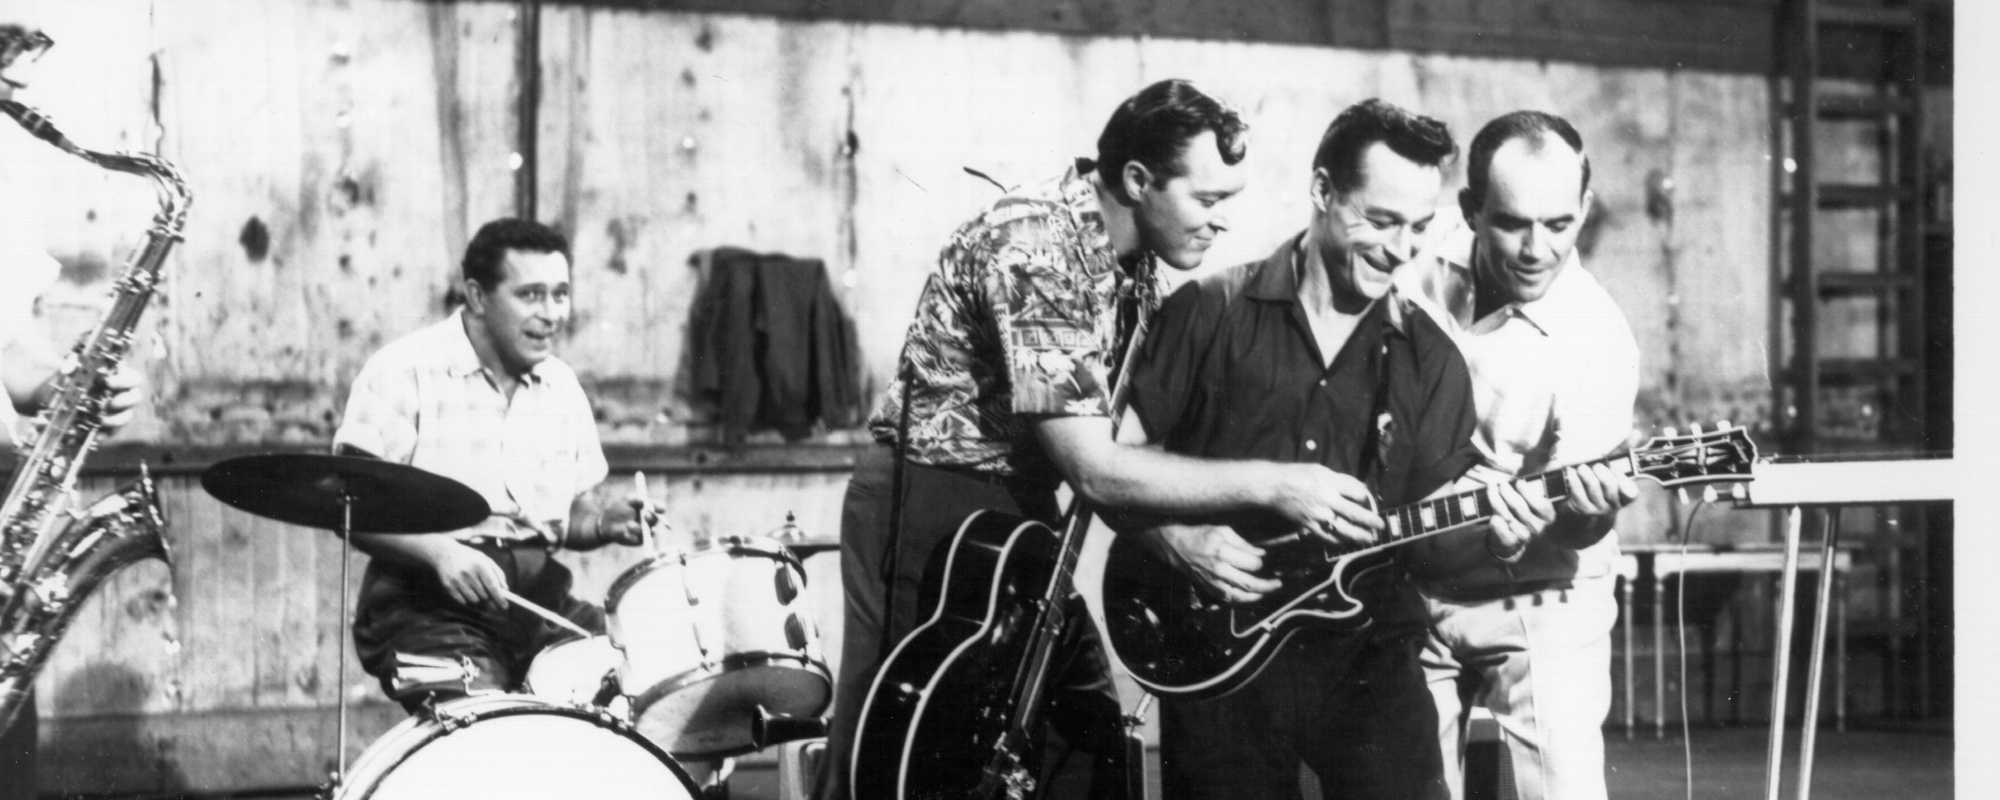 The Making of a Teenage Anthem: The Story Behind “Rock Around the Clock” by Bill Haley and His Comets